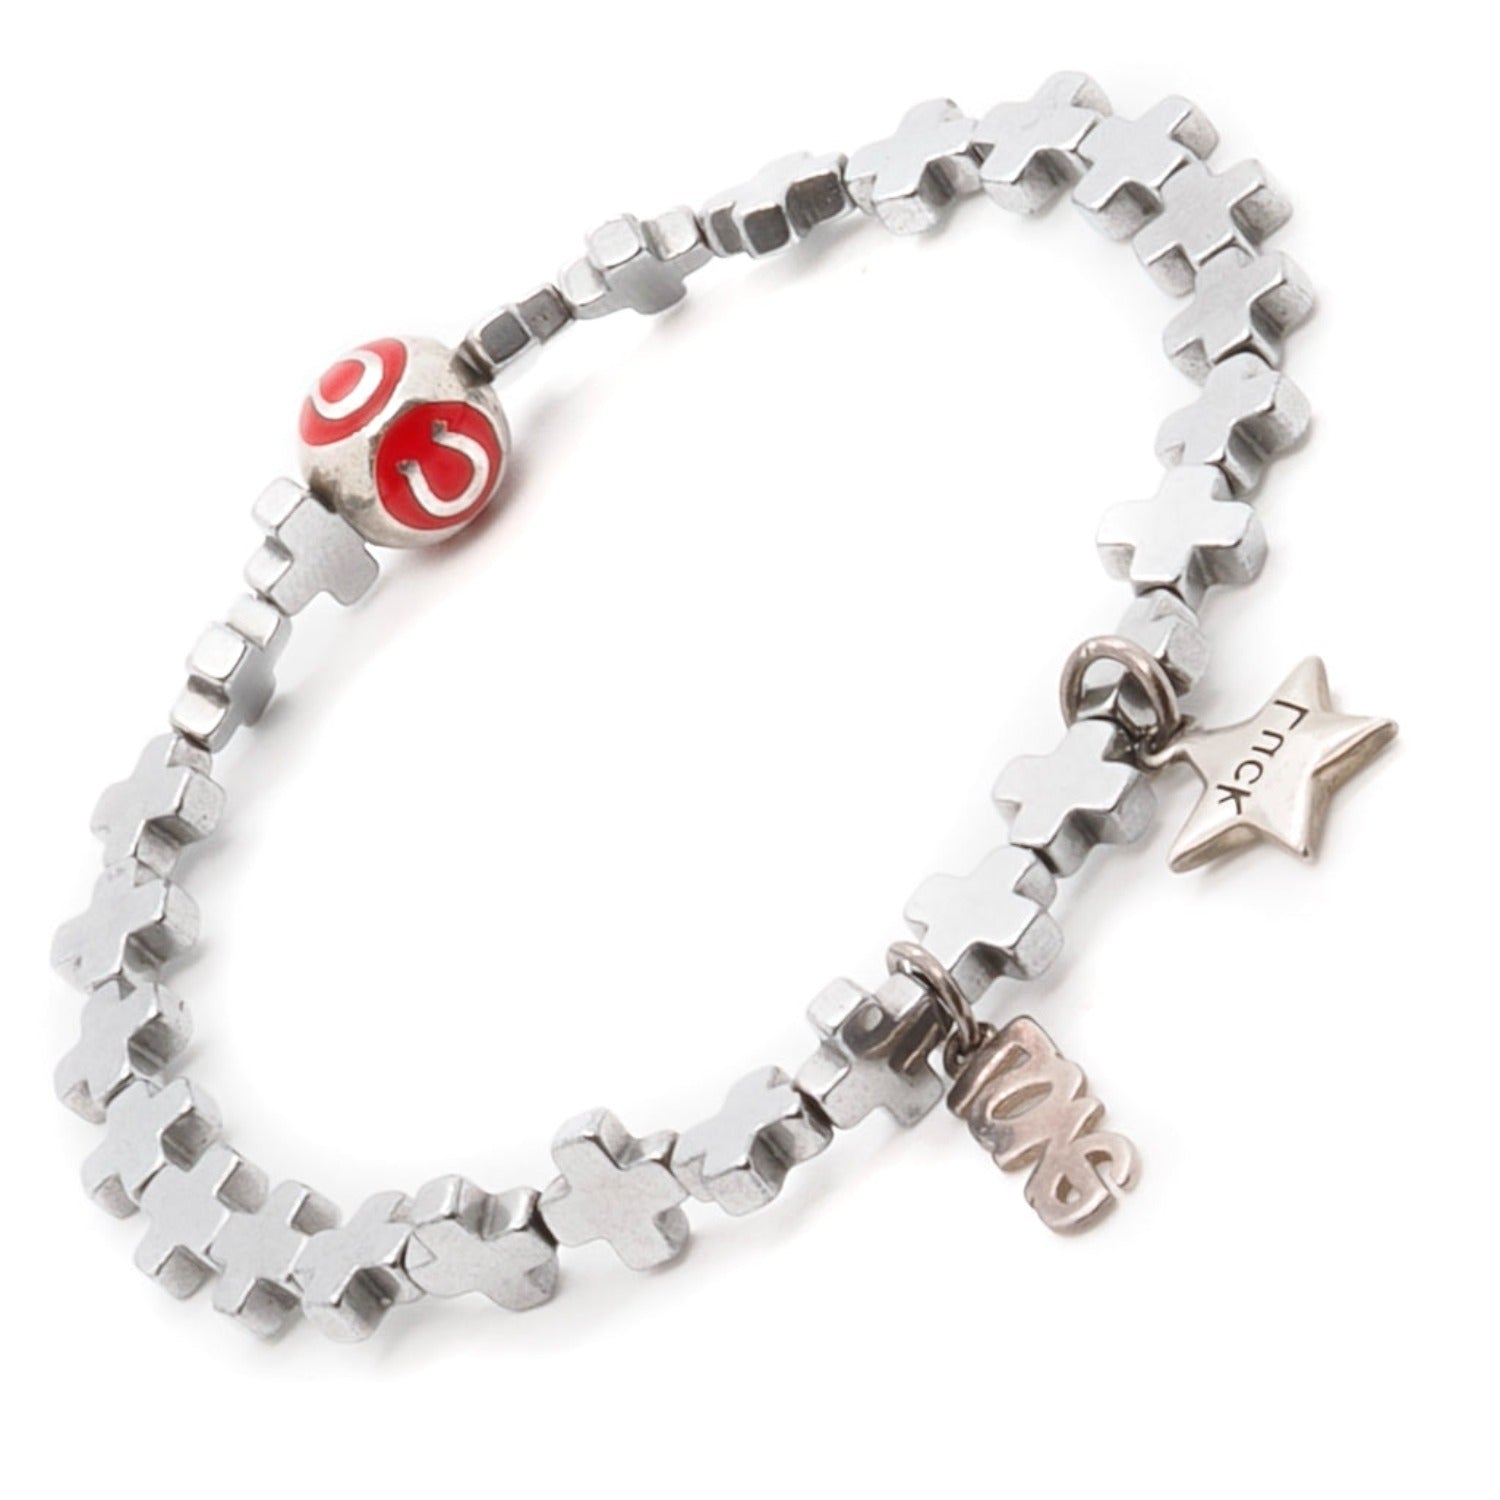 Admire the intricate details of the Silver Color Lucky Charms Bracelet, featuring sterling silver love and lucky charms.